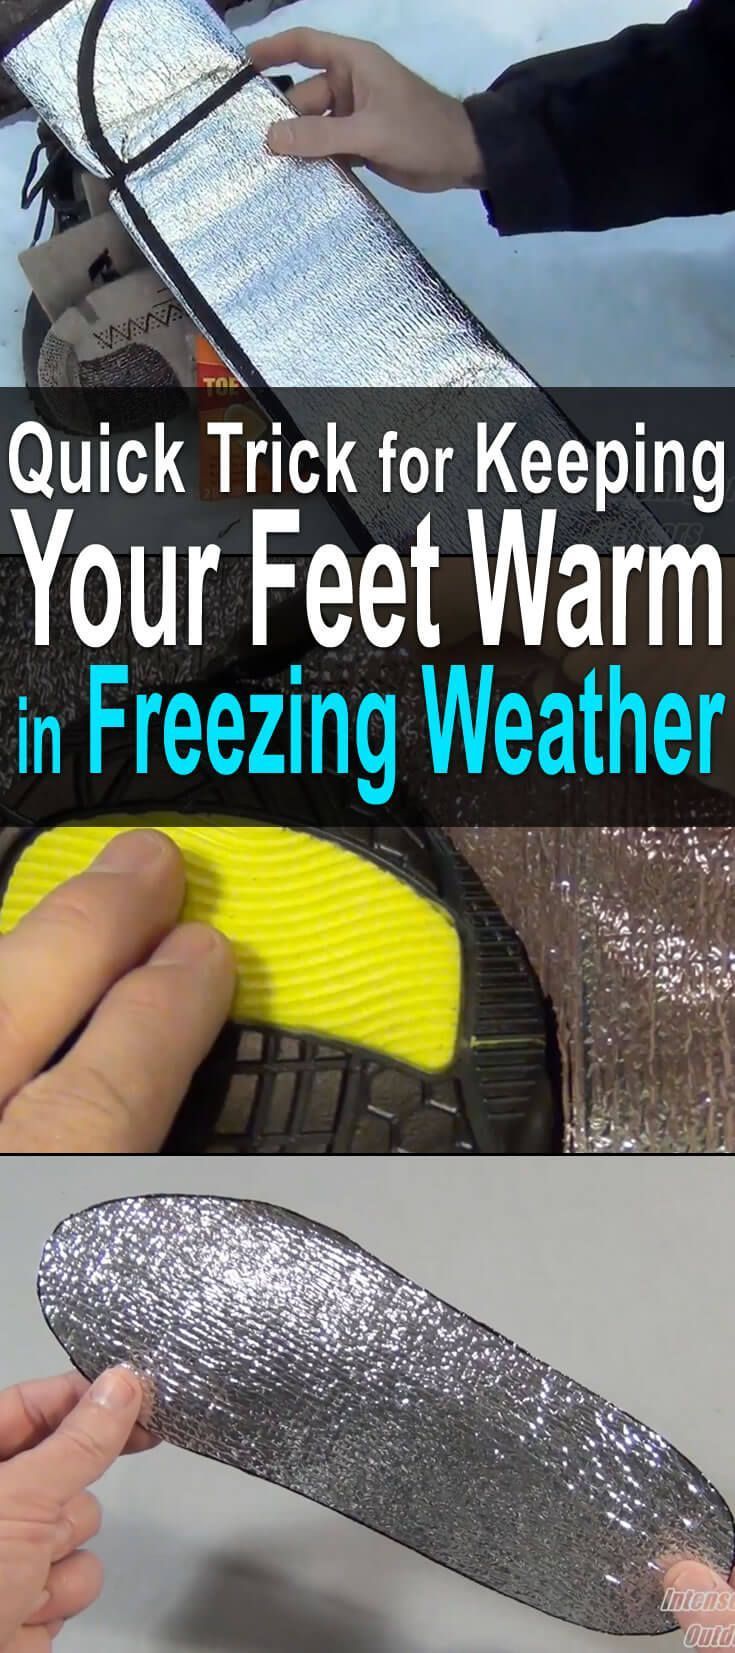 Quick Trick to Keep Your Feet Warm in Freezing Weather